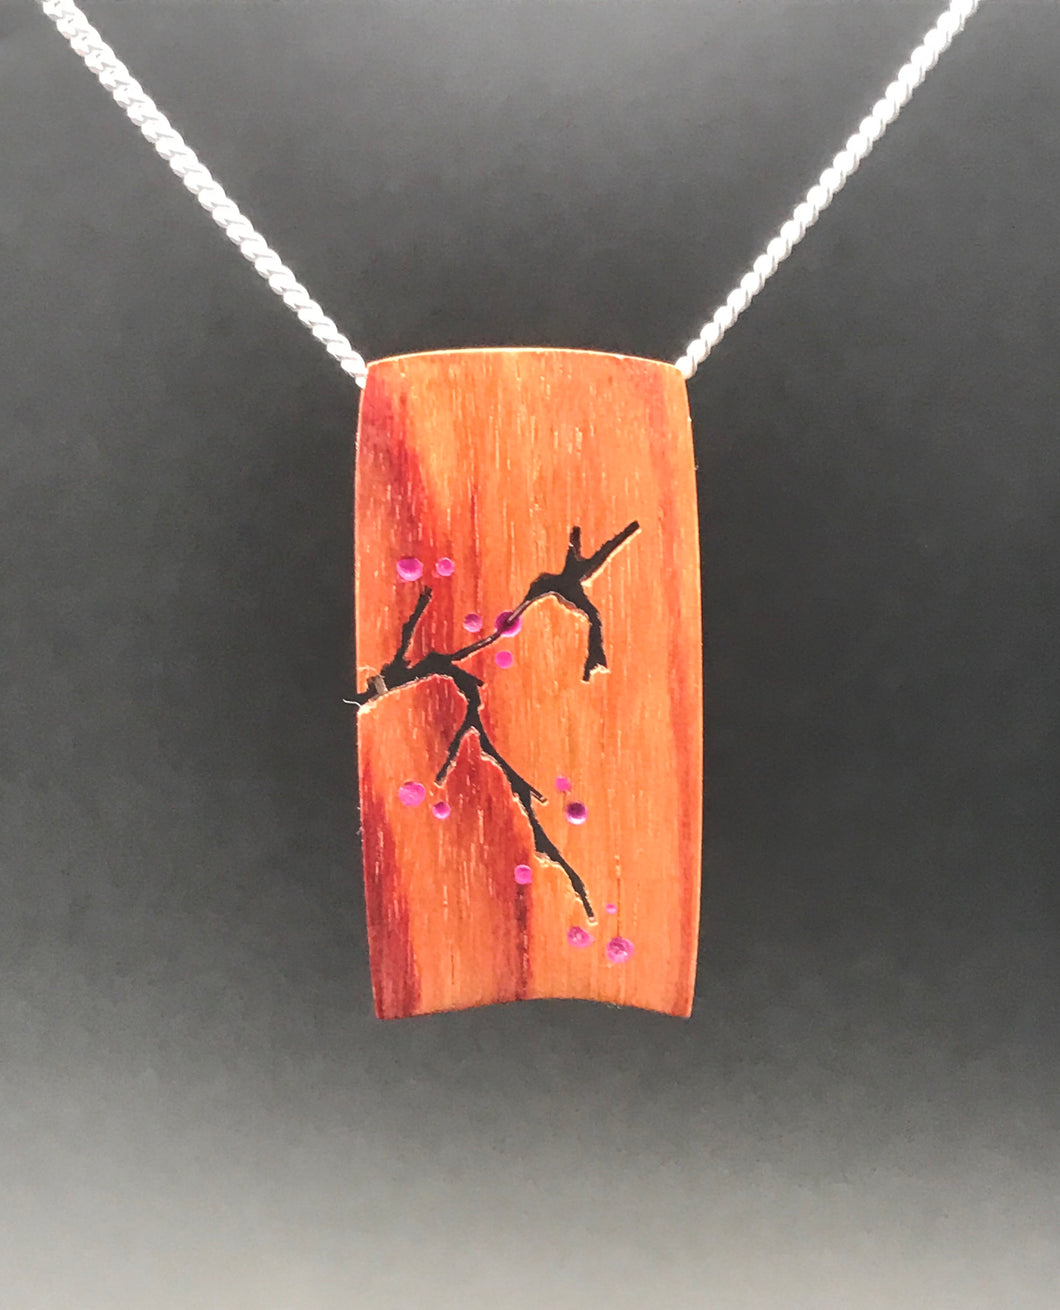 Hummingbird Necklace Wood Carving, Bird and Cherry Blossom Branch Wooden Jewelry